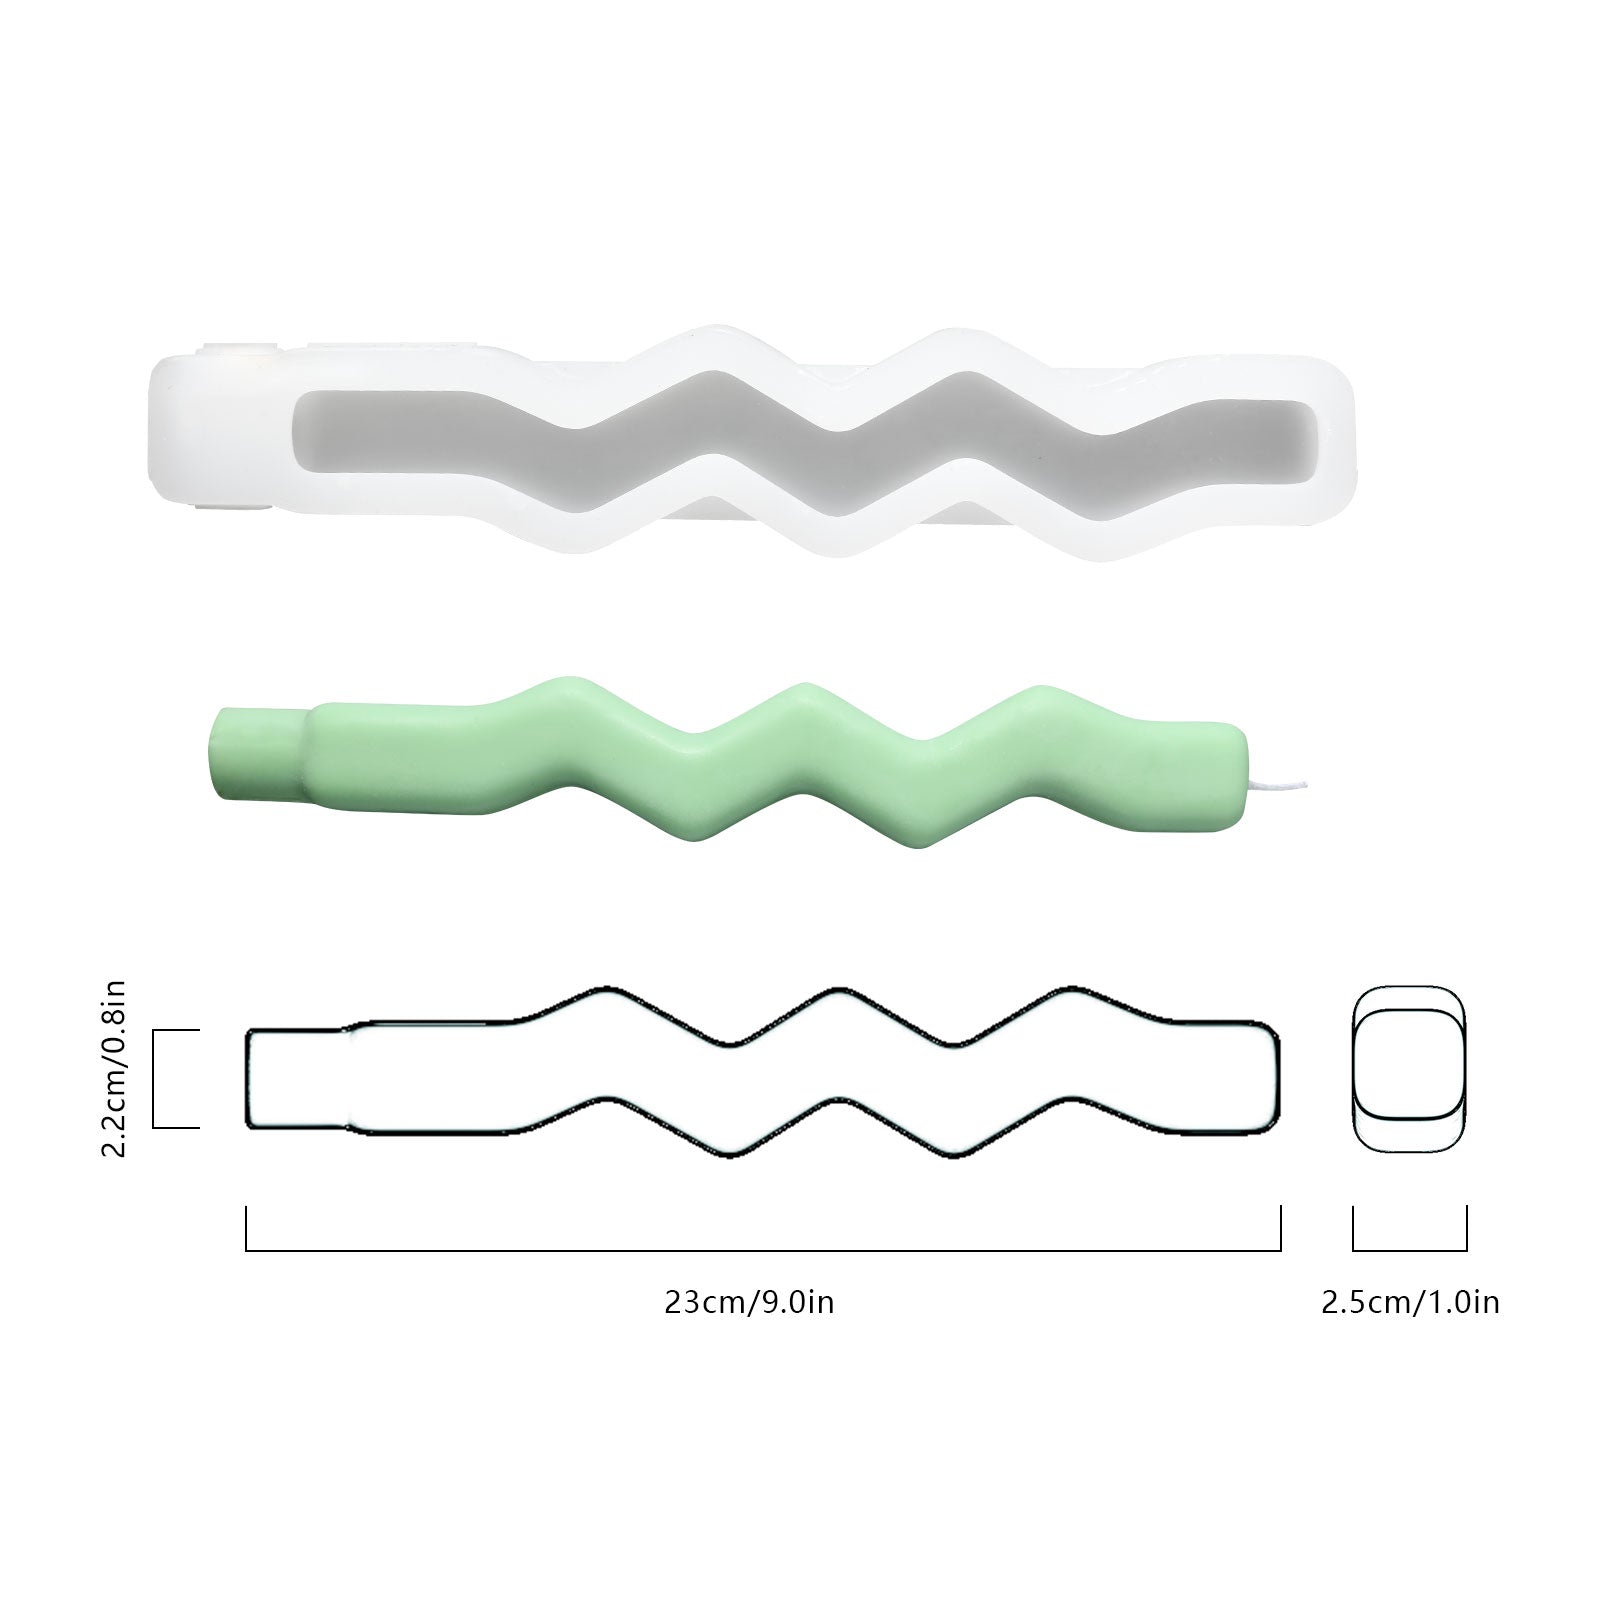 Boowan Nicole: 30cm Bamboo shaped Spiral Taper Candle Mould